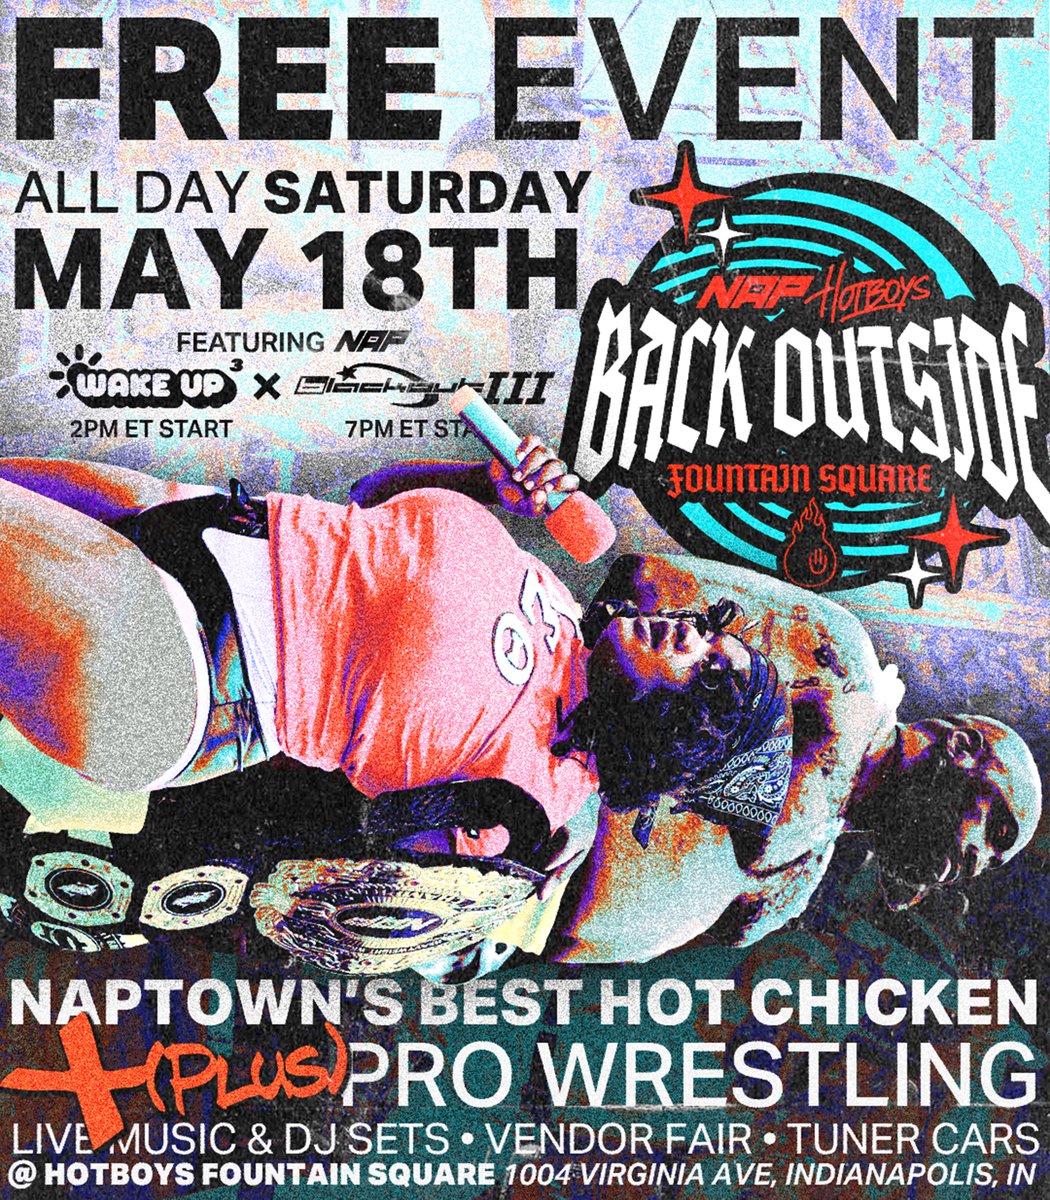 BREAKING Sat, May 18th, Calvin Tankman brings the DPW gold home to Indy Tankman will defend the DPW World Title at our free-to-the-public event BLACKOUT III versus an opponent sanctioned by both DPW & NAP officials in the 1st world title match outside of DPW Opponent TBA soon